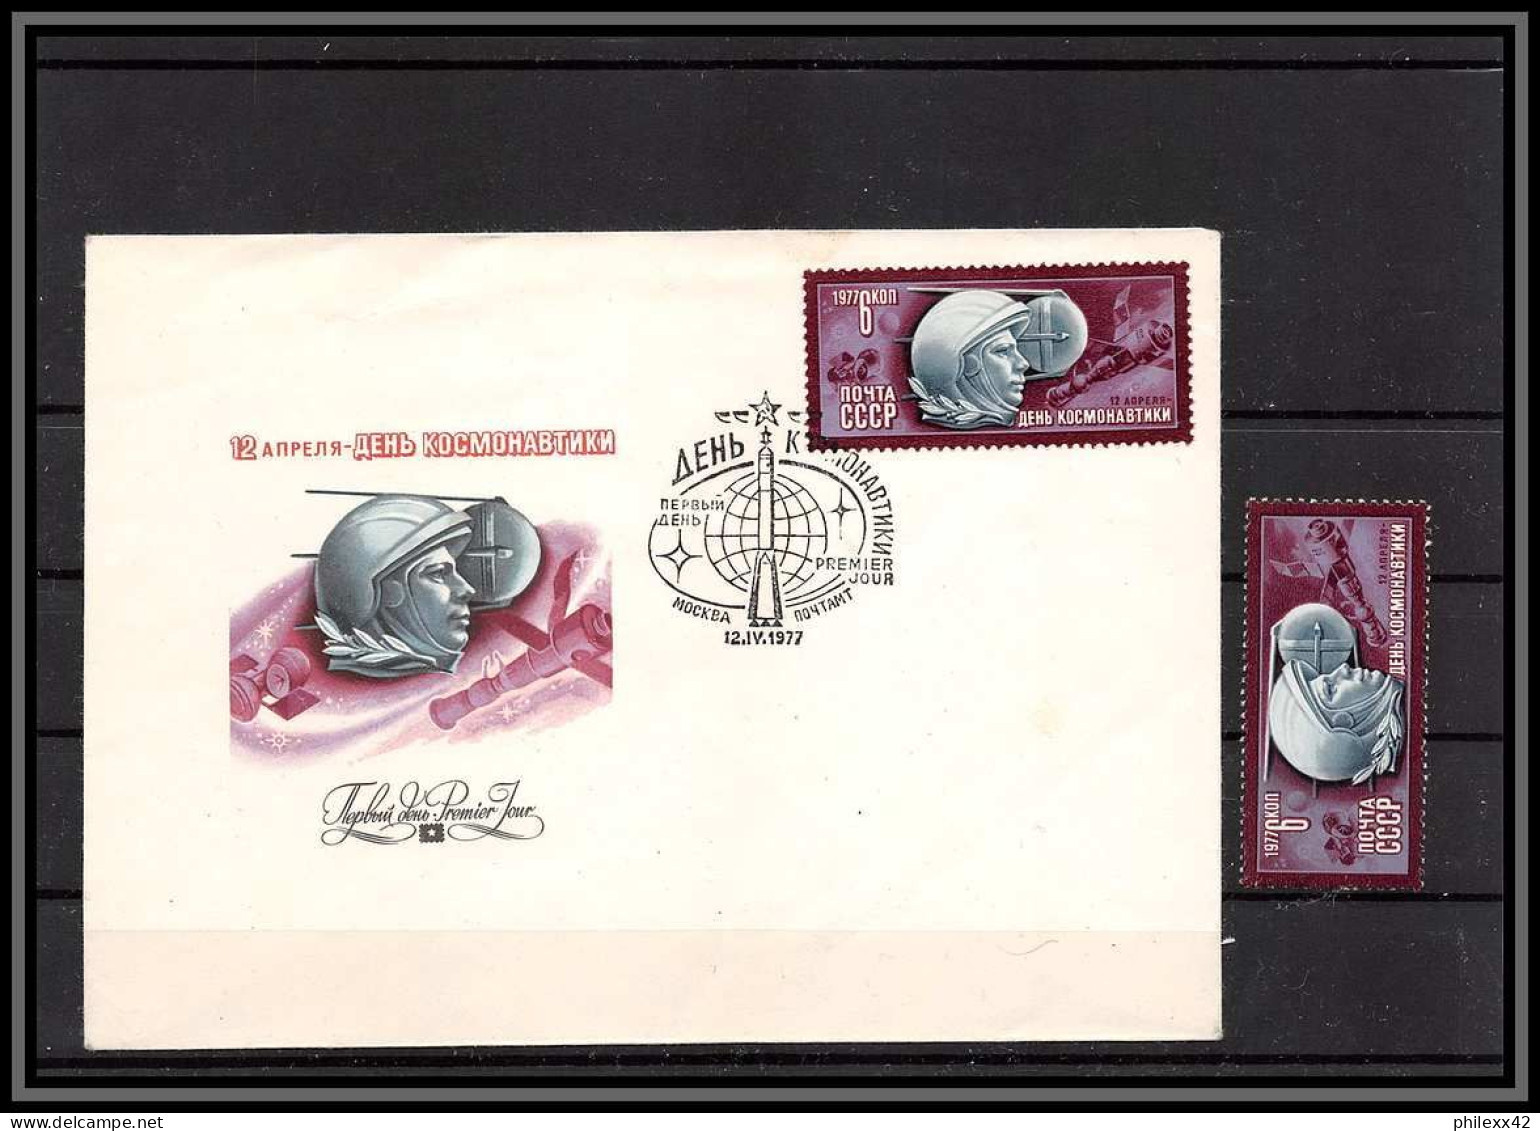 3391 Espace (space) Lettre (cover) Russie (Russia Urss USSR) 4363 Fdc + Mnh ** Cosmonauts Day Gagarine Gagarin 12/4/1977 - Russia & URSS